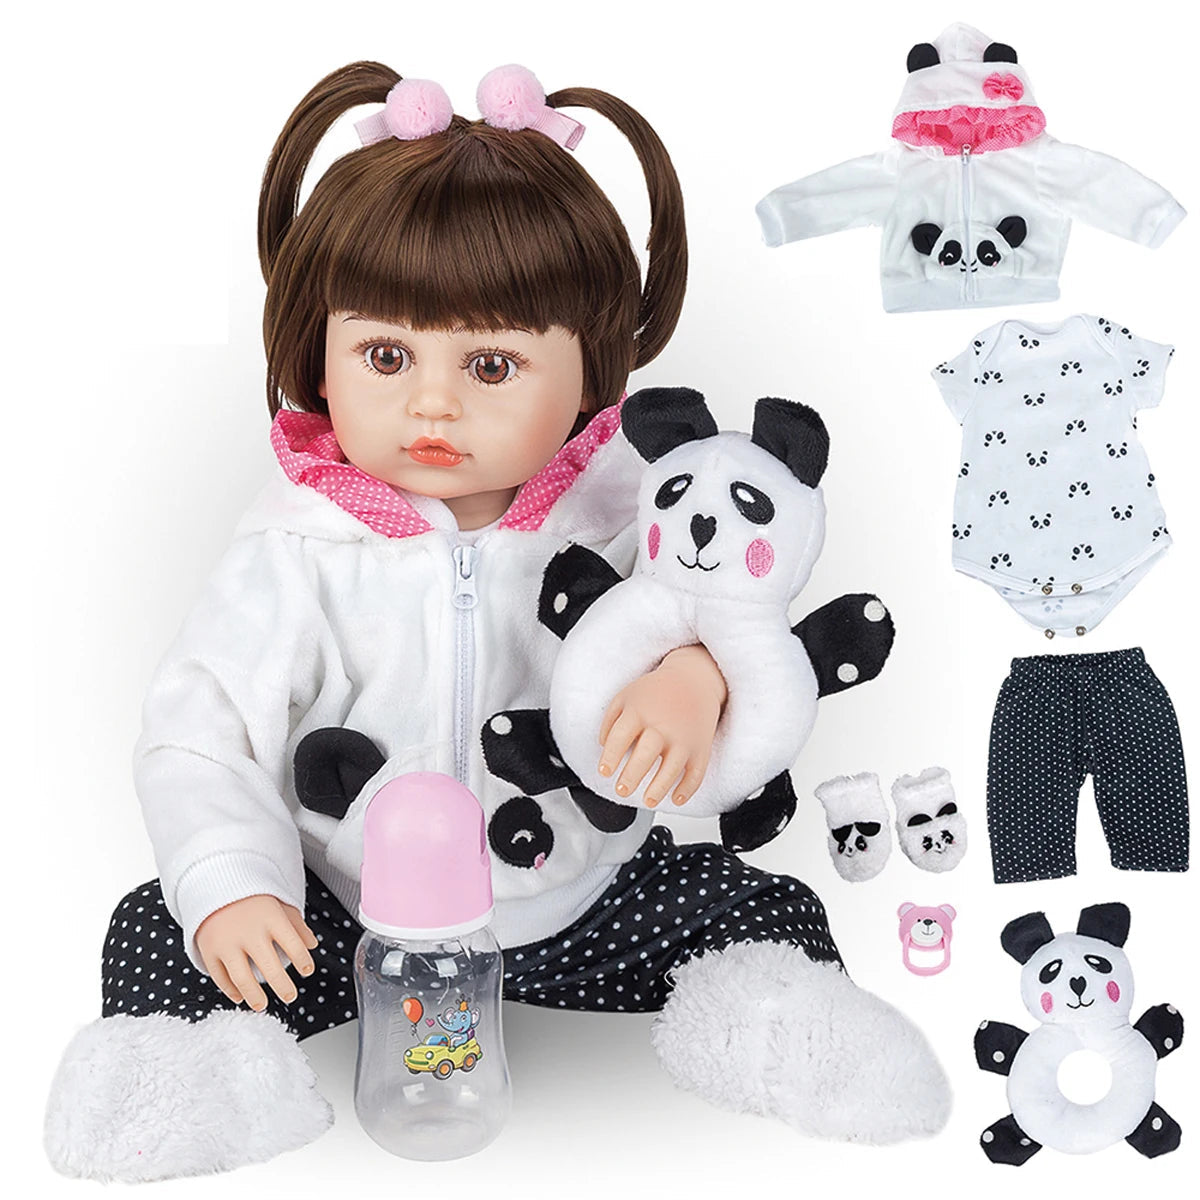 Brastoy Reborn Doll Girl and Boy with 100% Silicone Bodies and Bathtime Accessories - ToylandEU